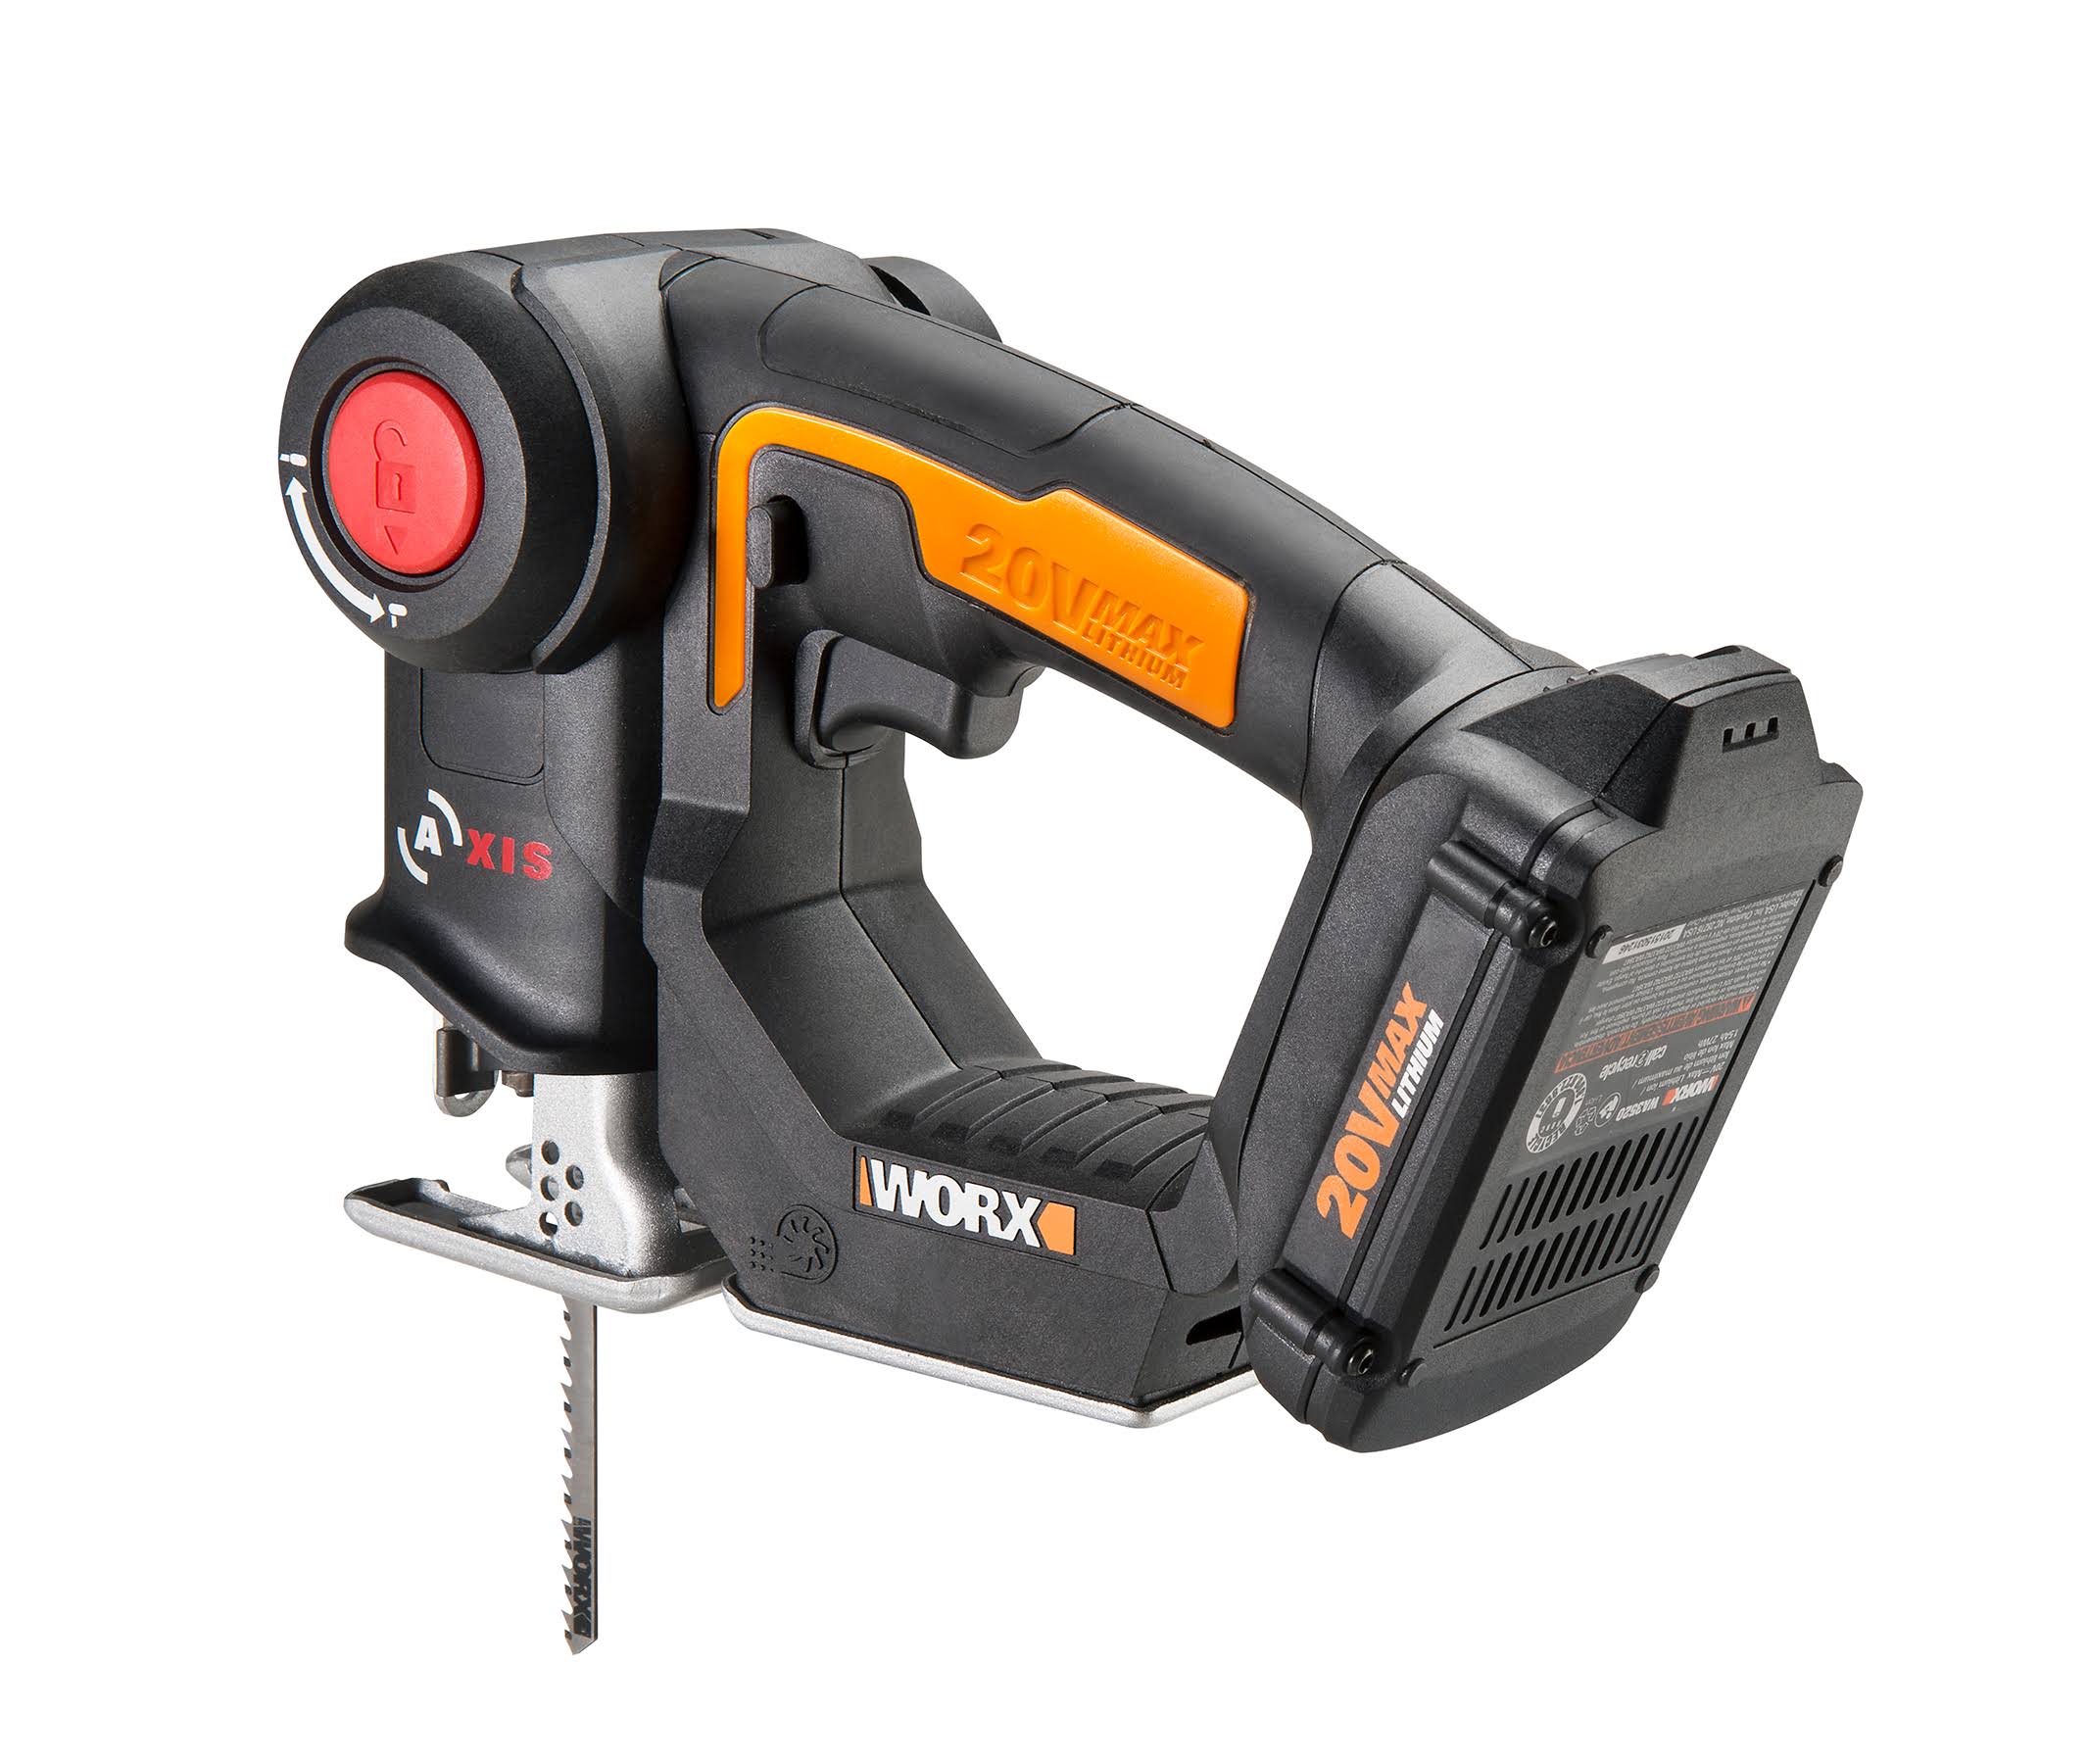 WORX WX550L 20V AXIS 2-in-1 Reciprocating Saw and Jigsaw with Orbital Mode, Variable Speed and Tool-Free Blade Change